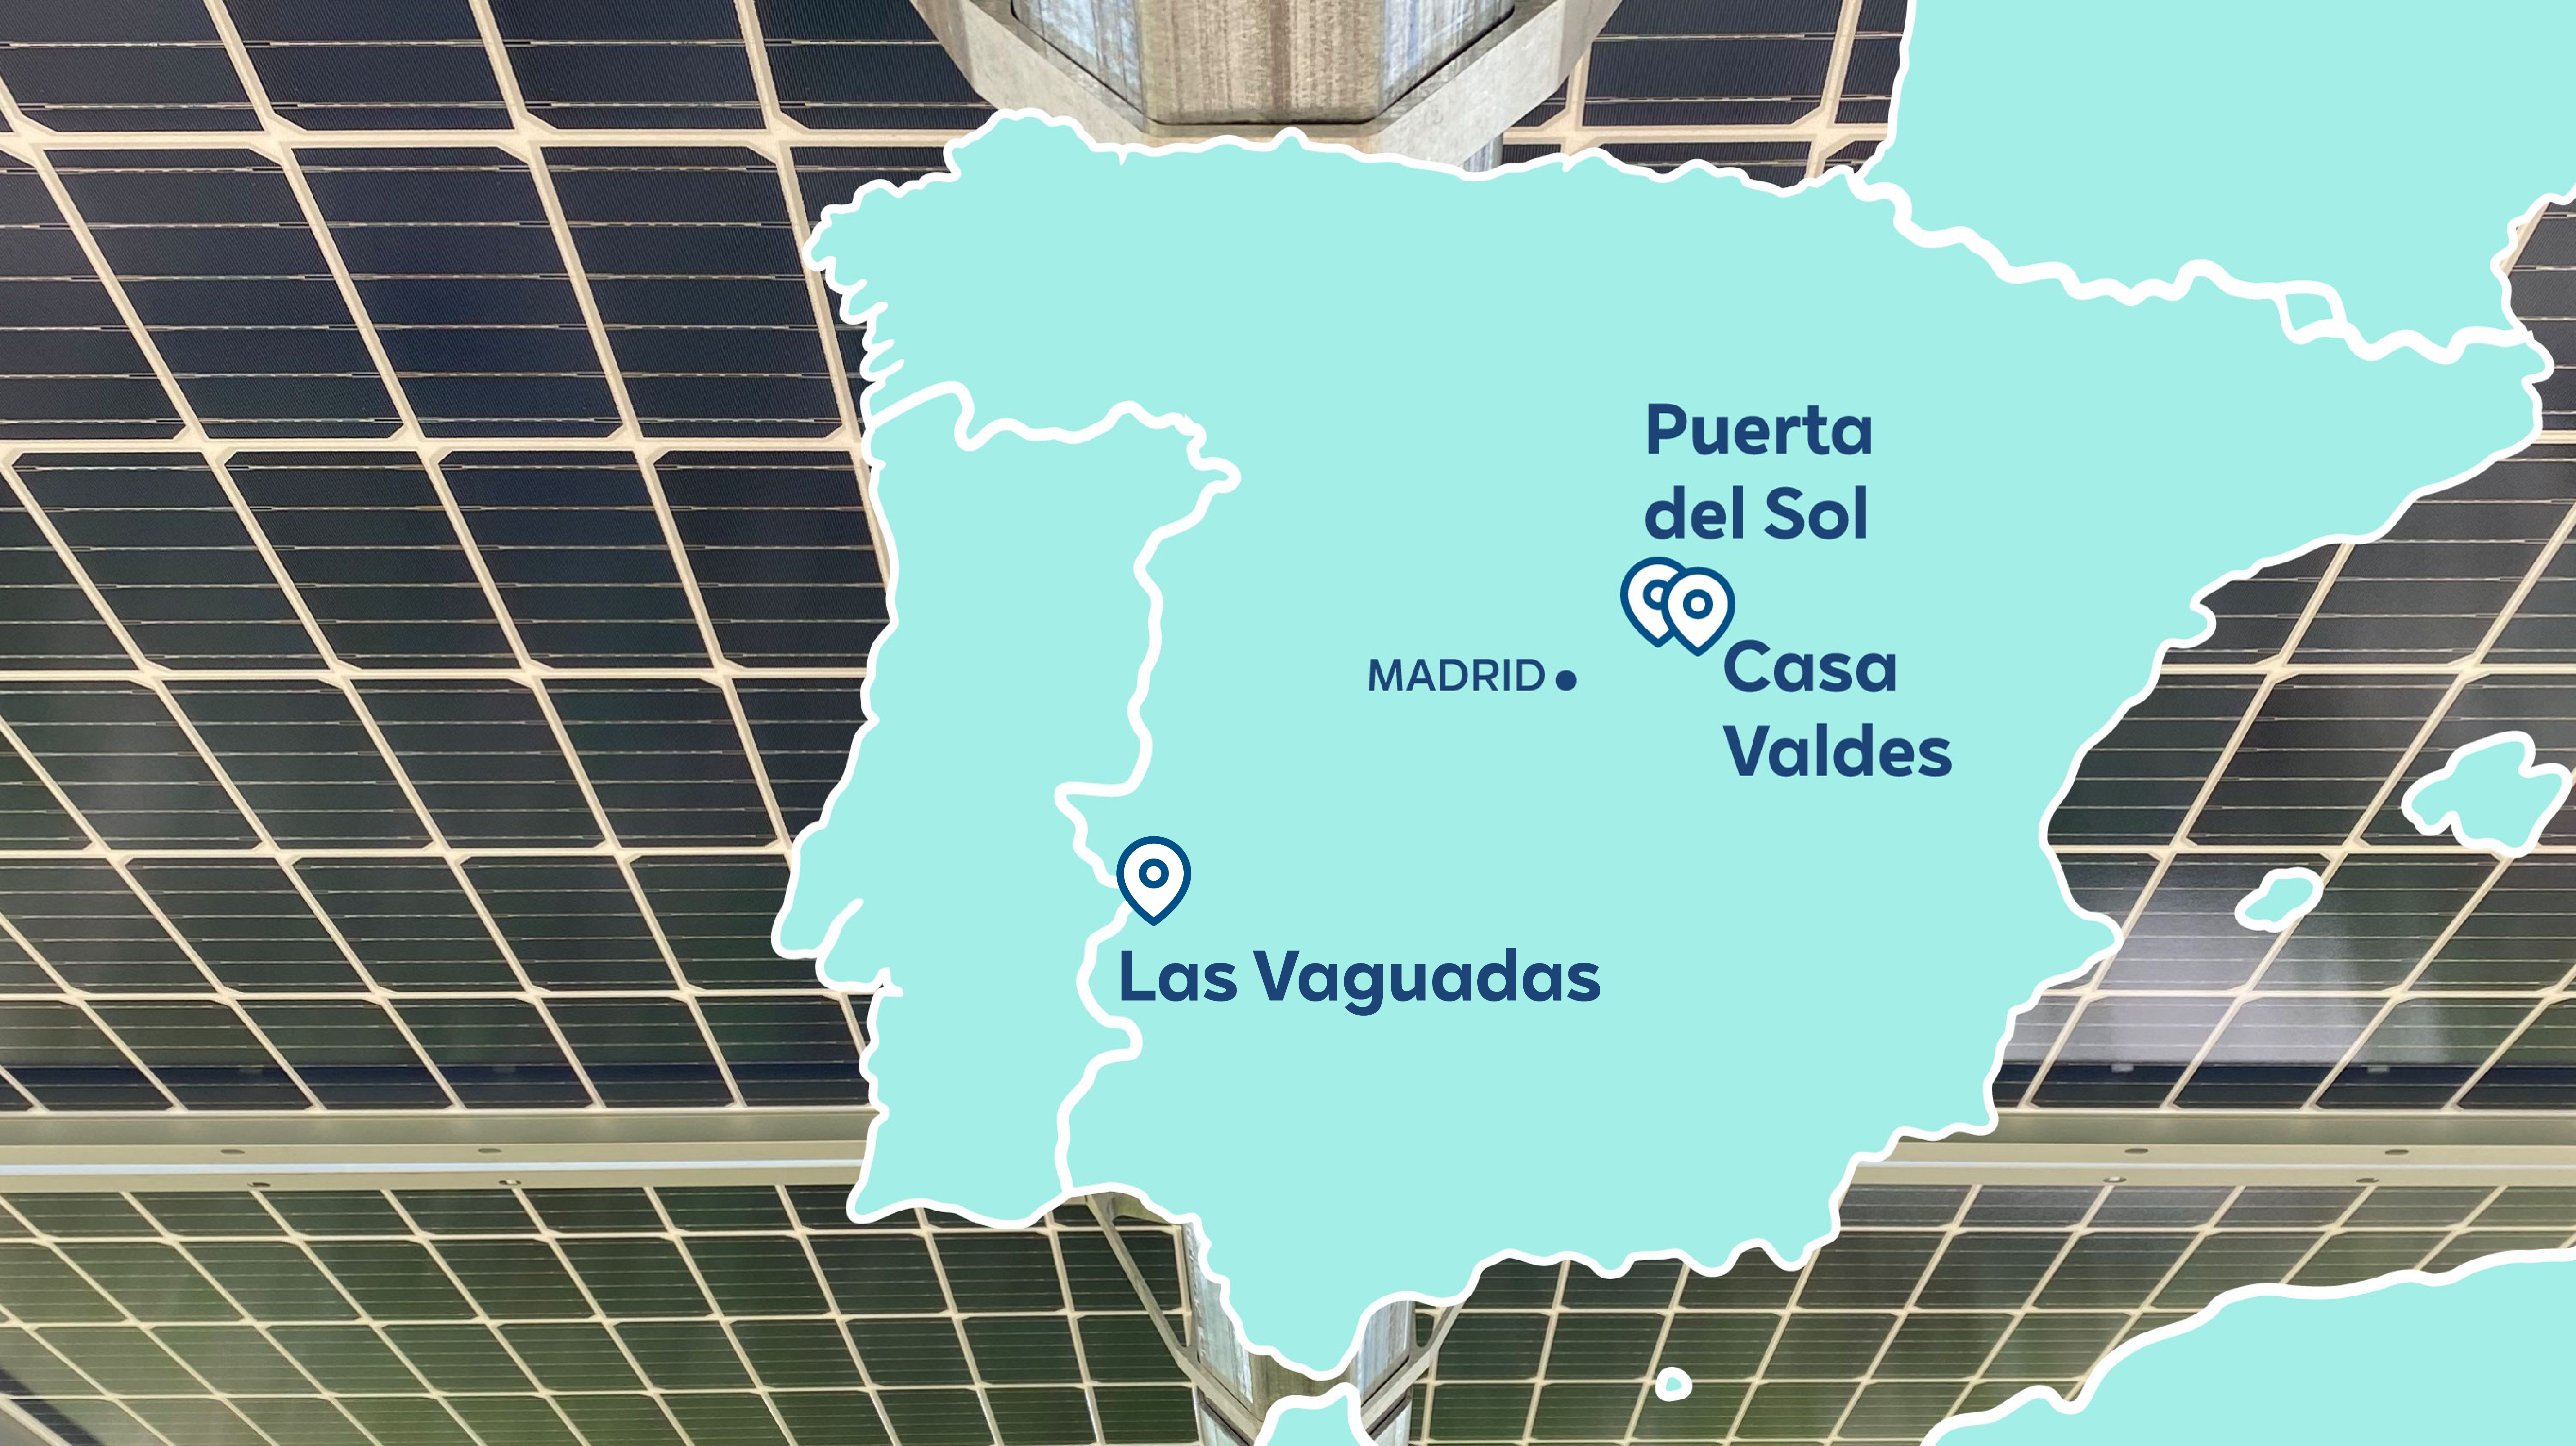 Spain: RWE starts construction of a ground-mounted  solar farm in the province of Badajoz